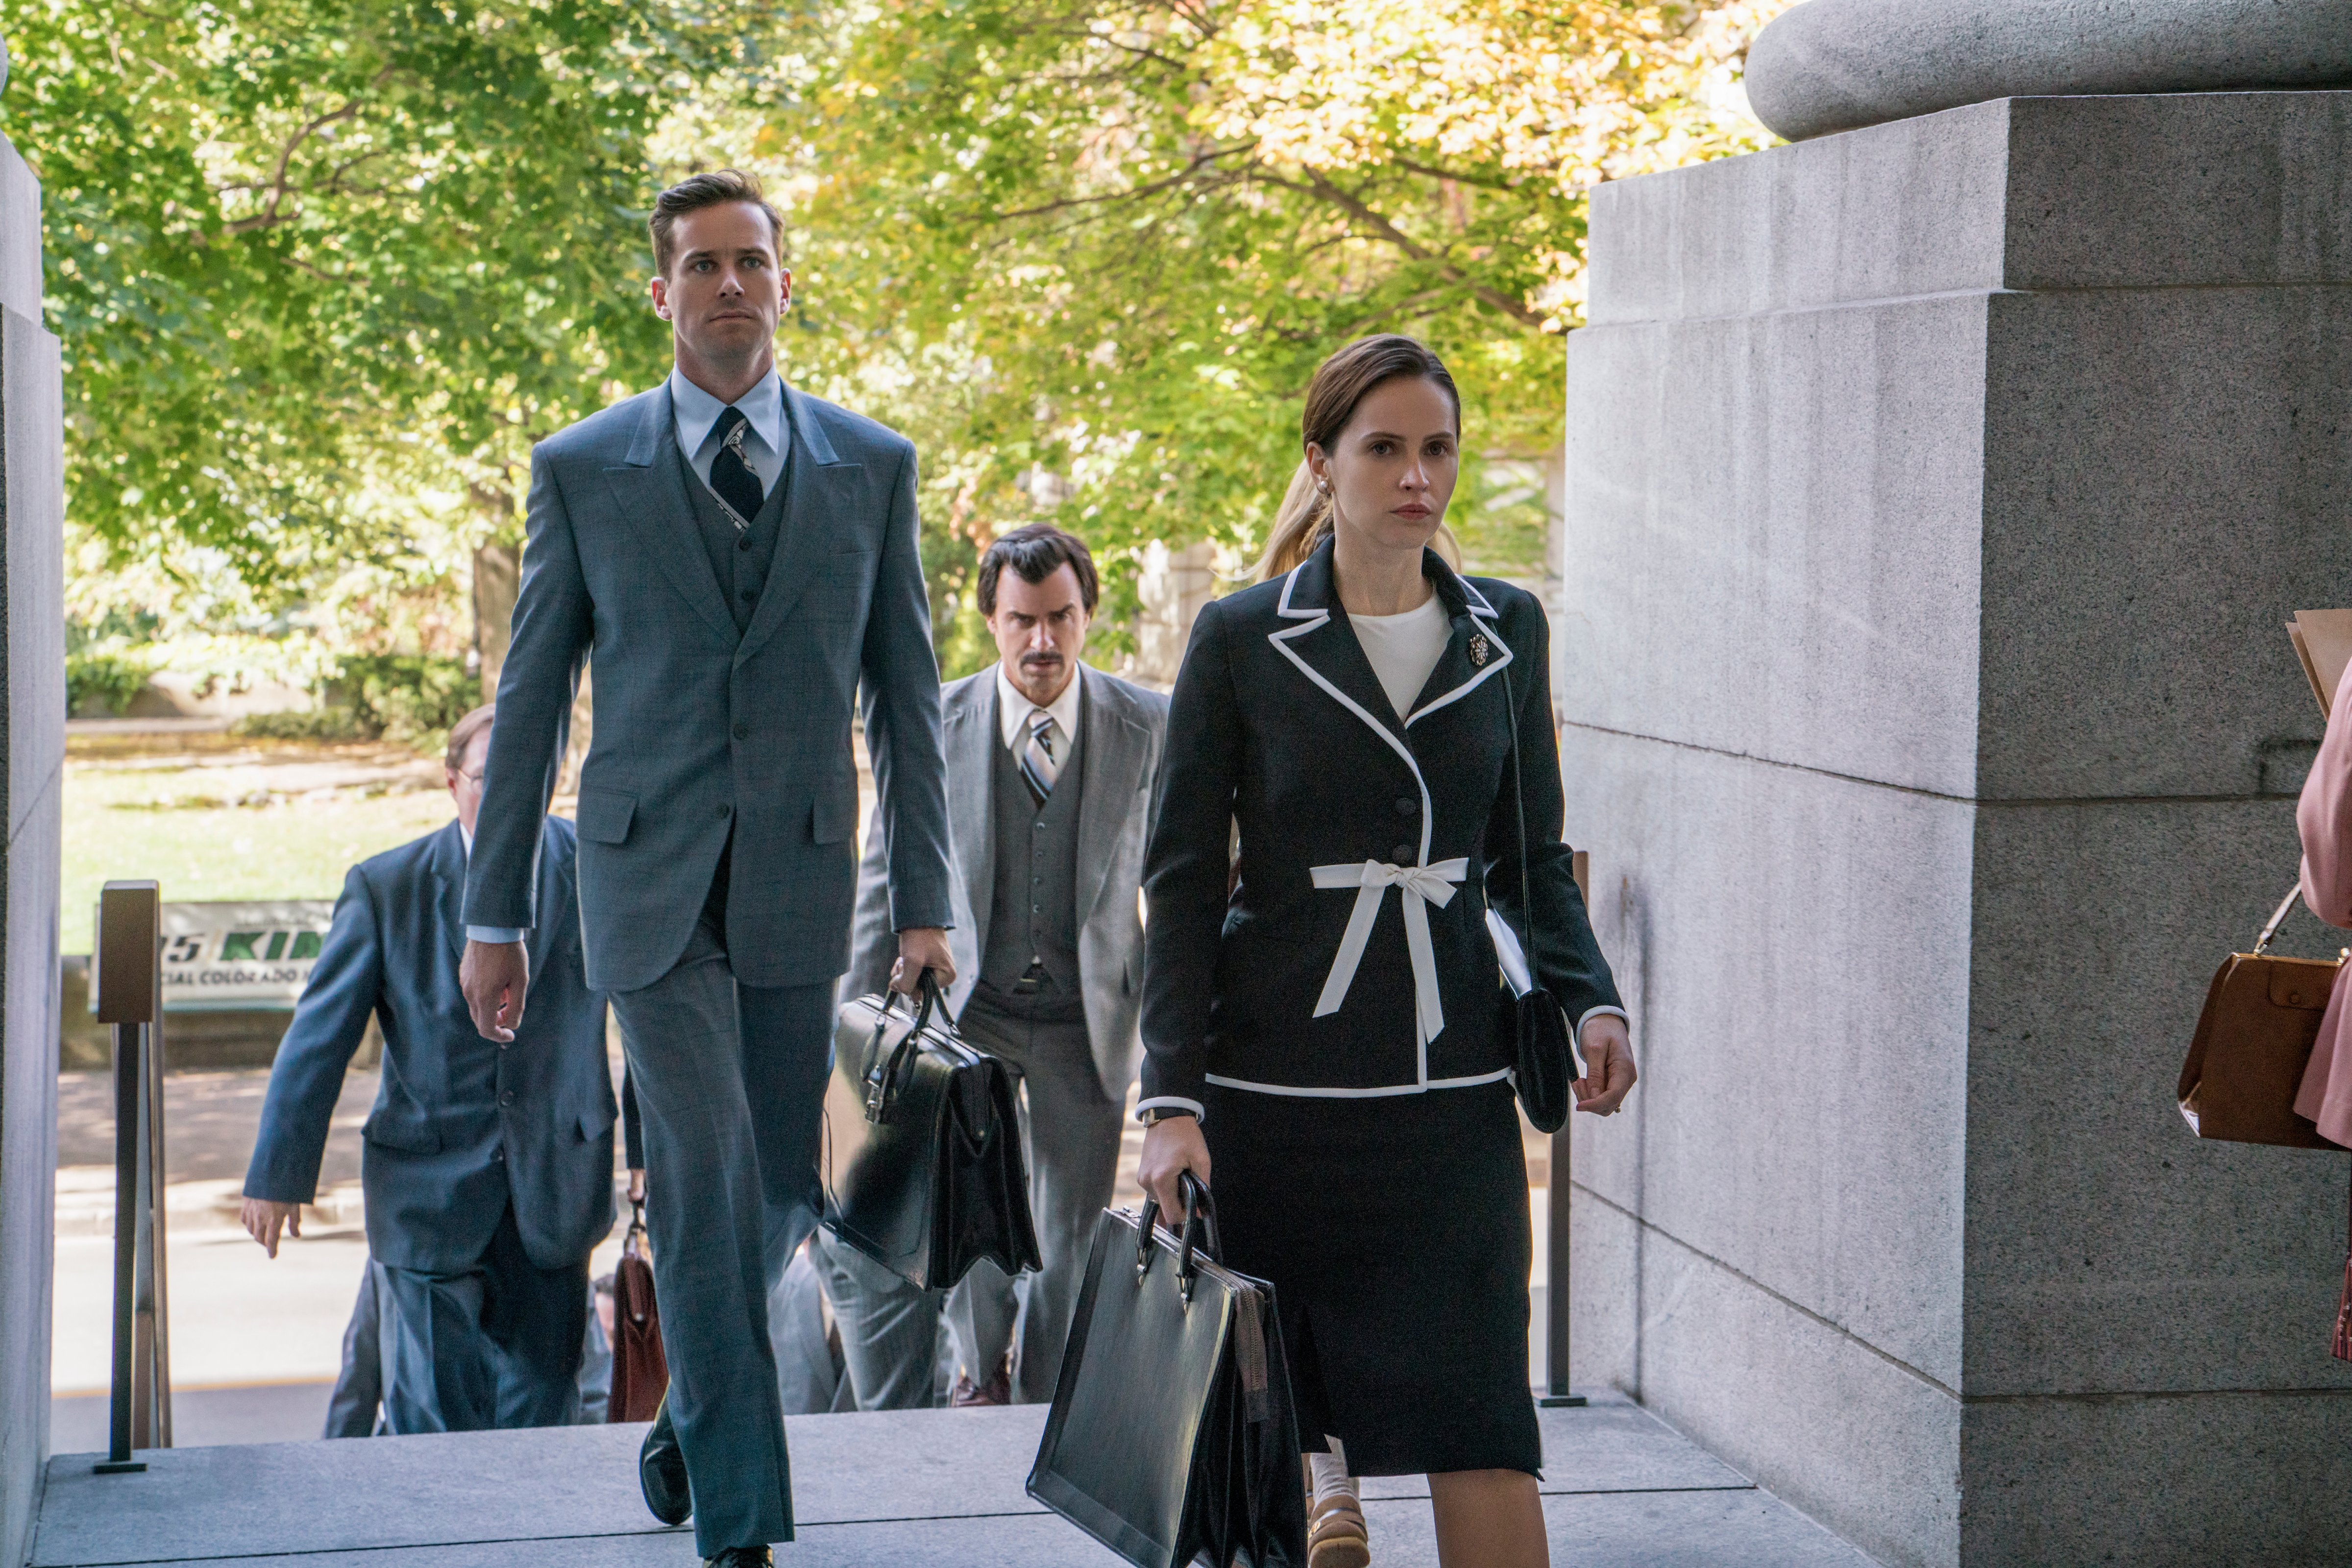 (l to r.) Armie Hammer as Marty Ginsburg, Justin Theroux as Melvin Wulf, and Felicity Jones as Ruth Bader Ginsburg. (Jonathan Wenk—Focus Features)